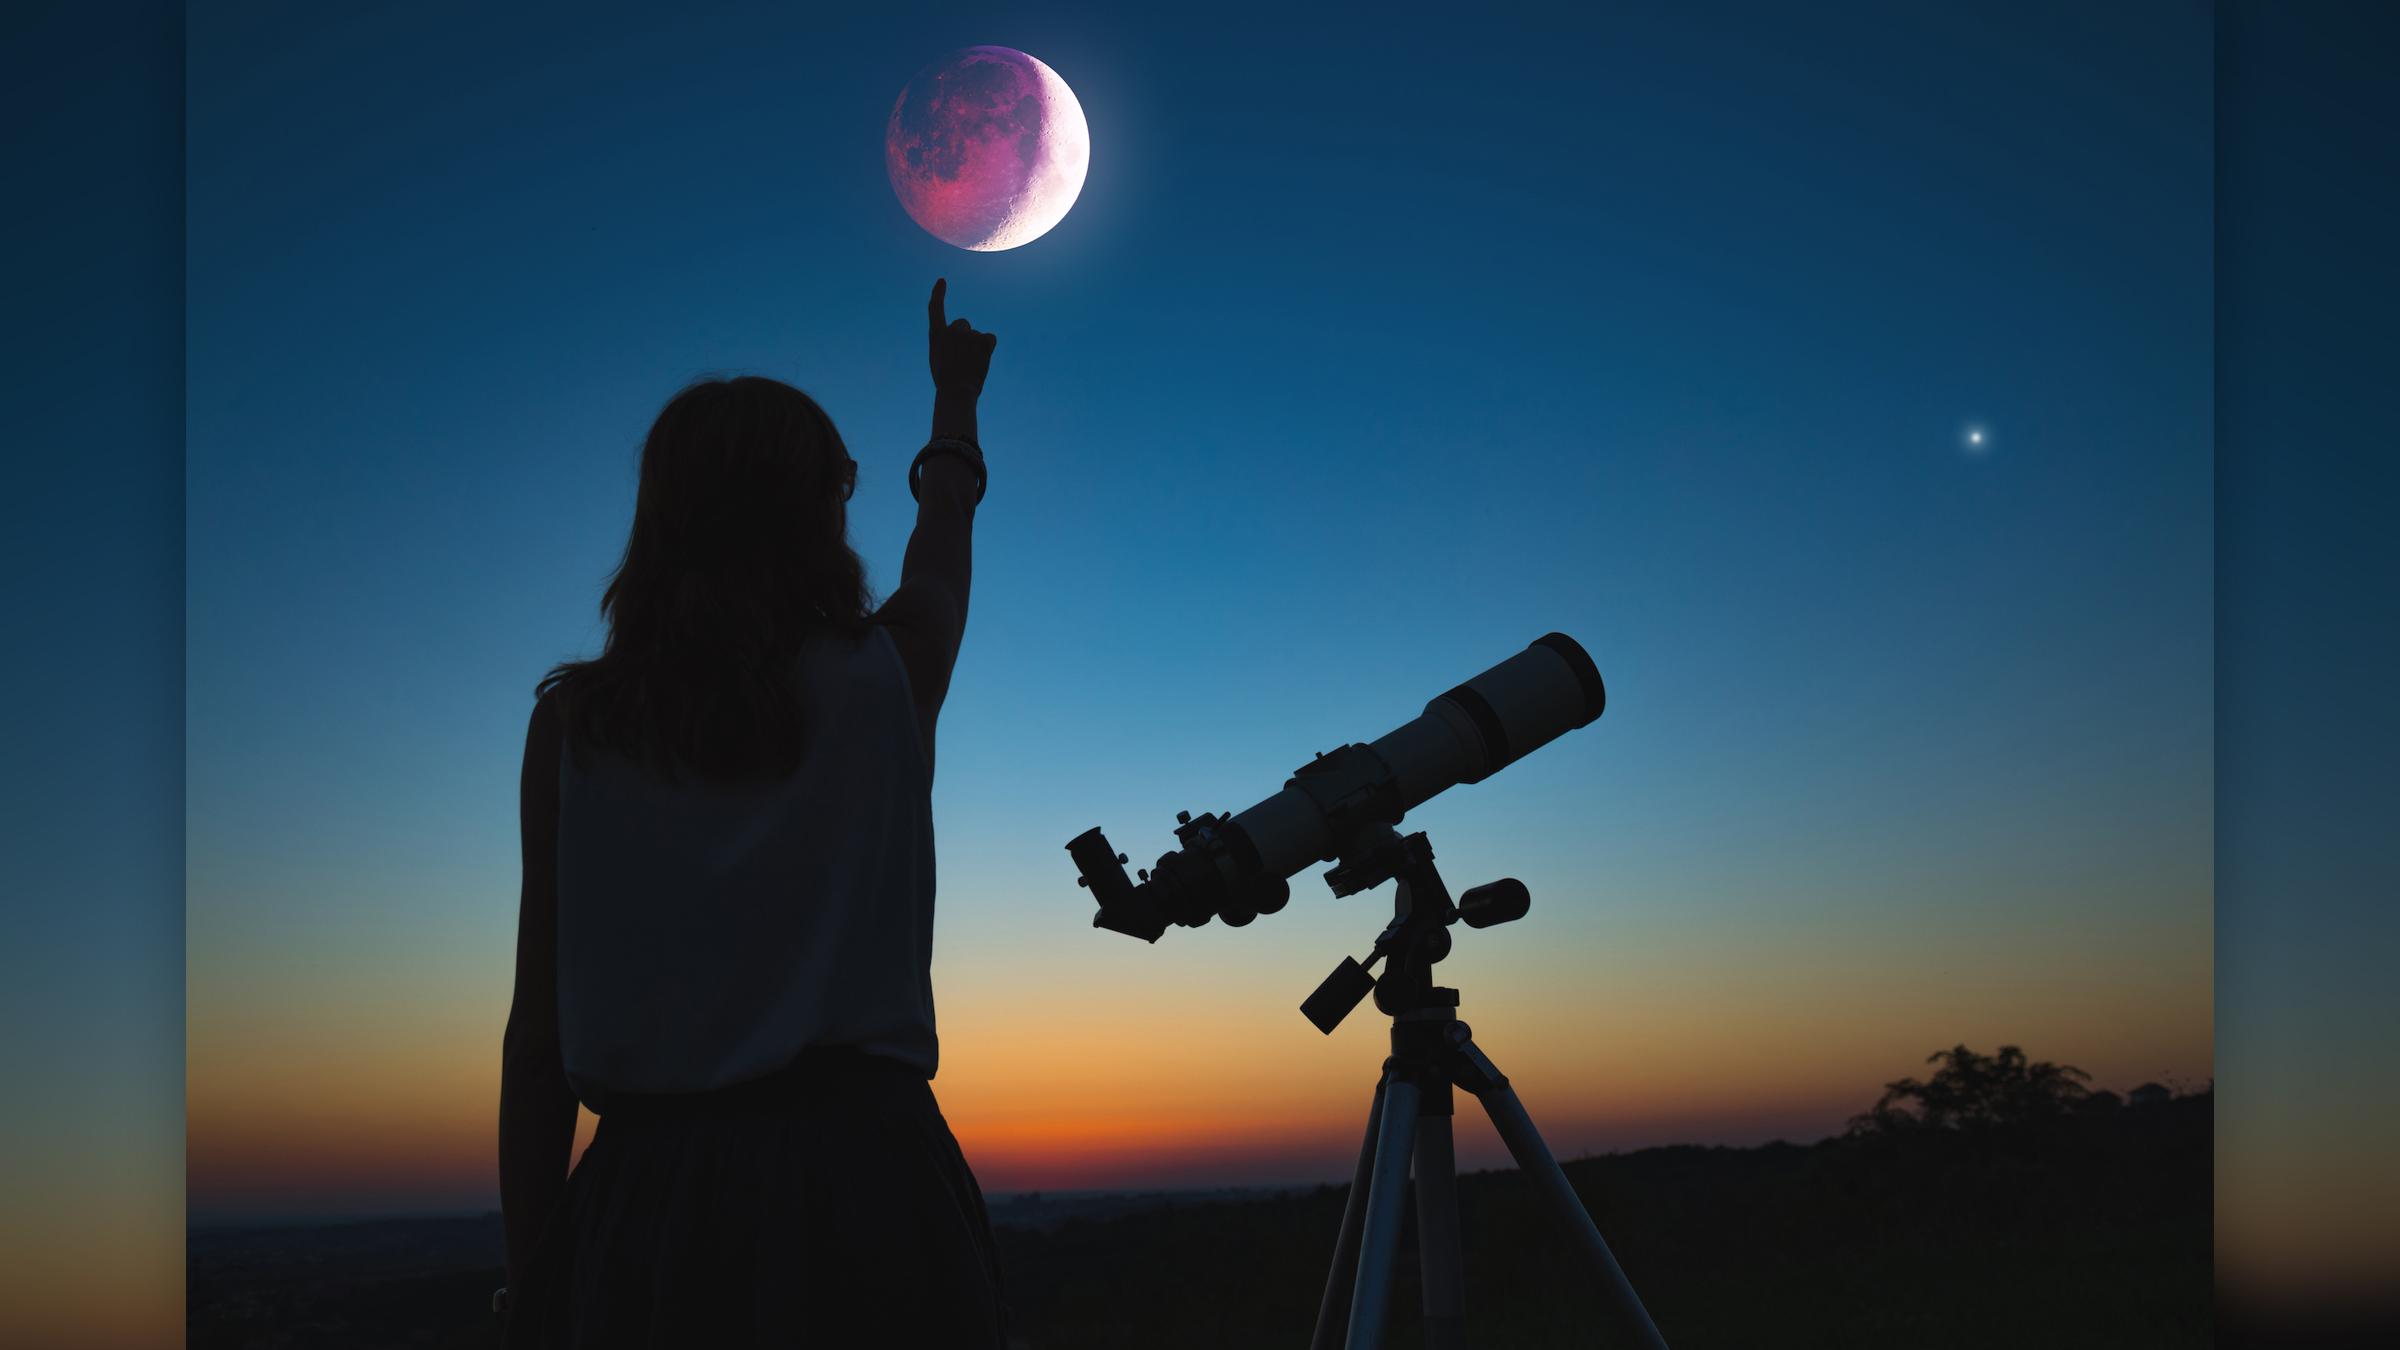 A girl with a telescope watches a lunar eclipse at dawn.